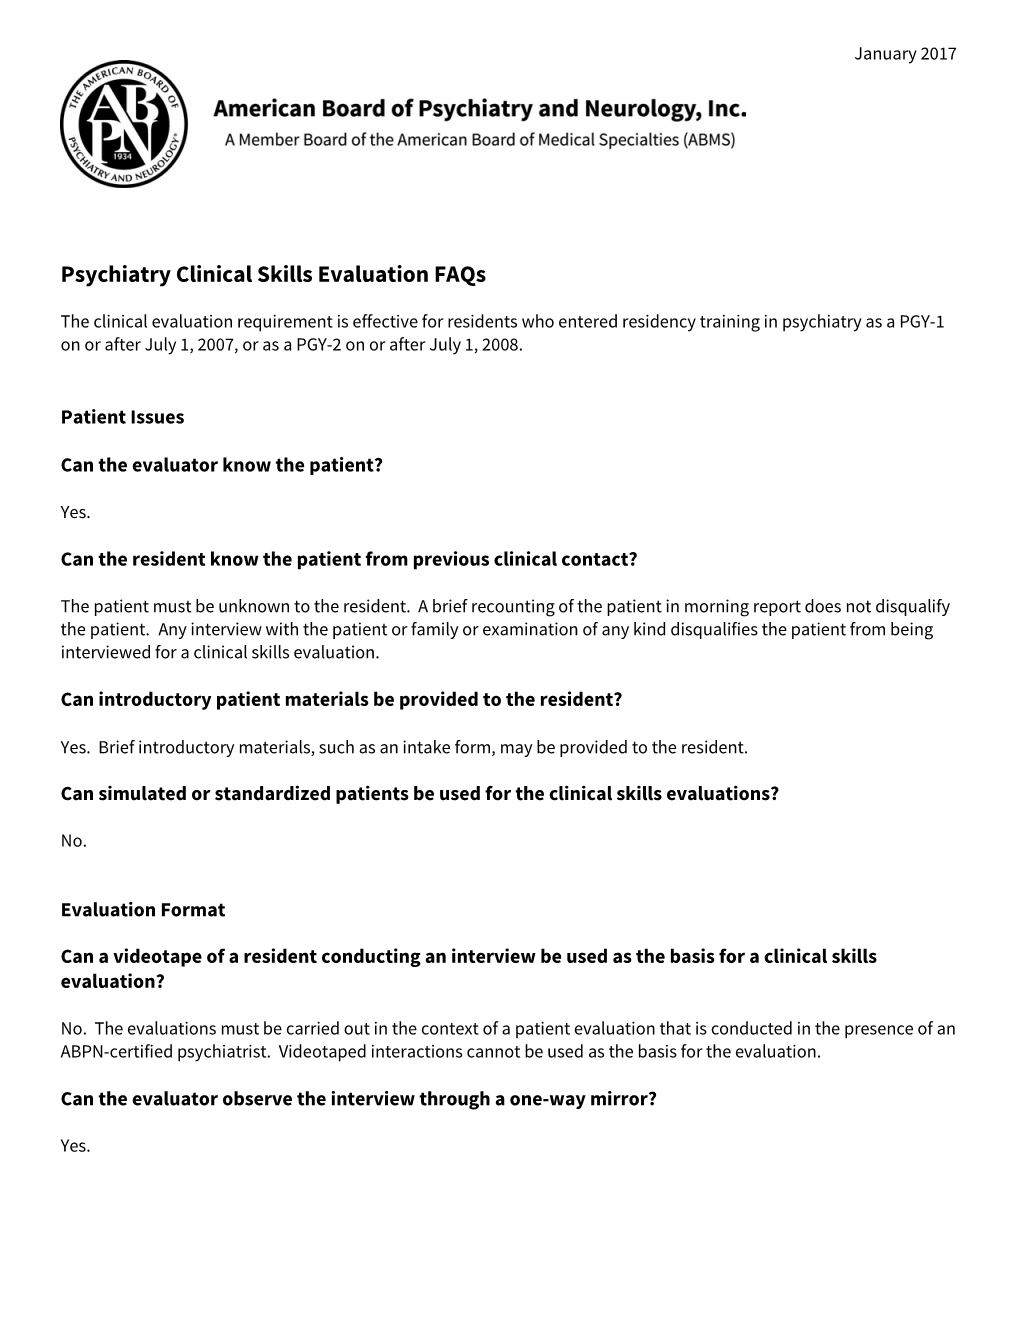 Psychiatry Clinical Skills Evaluation Faqs